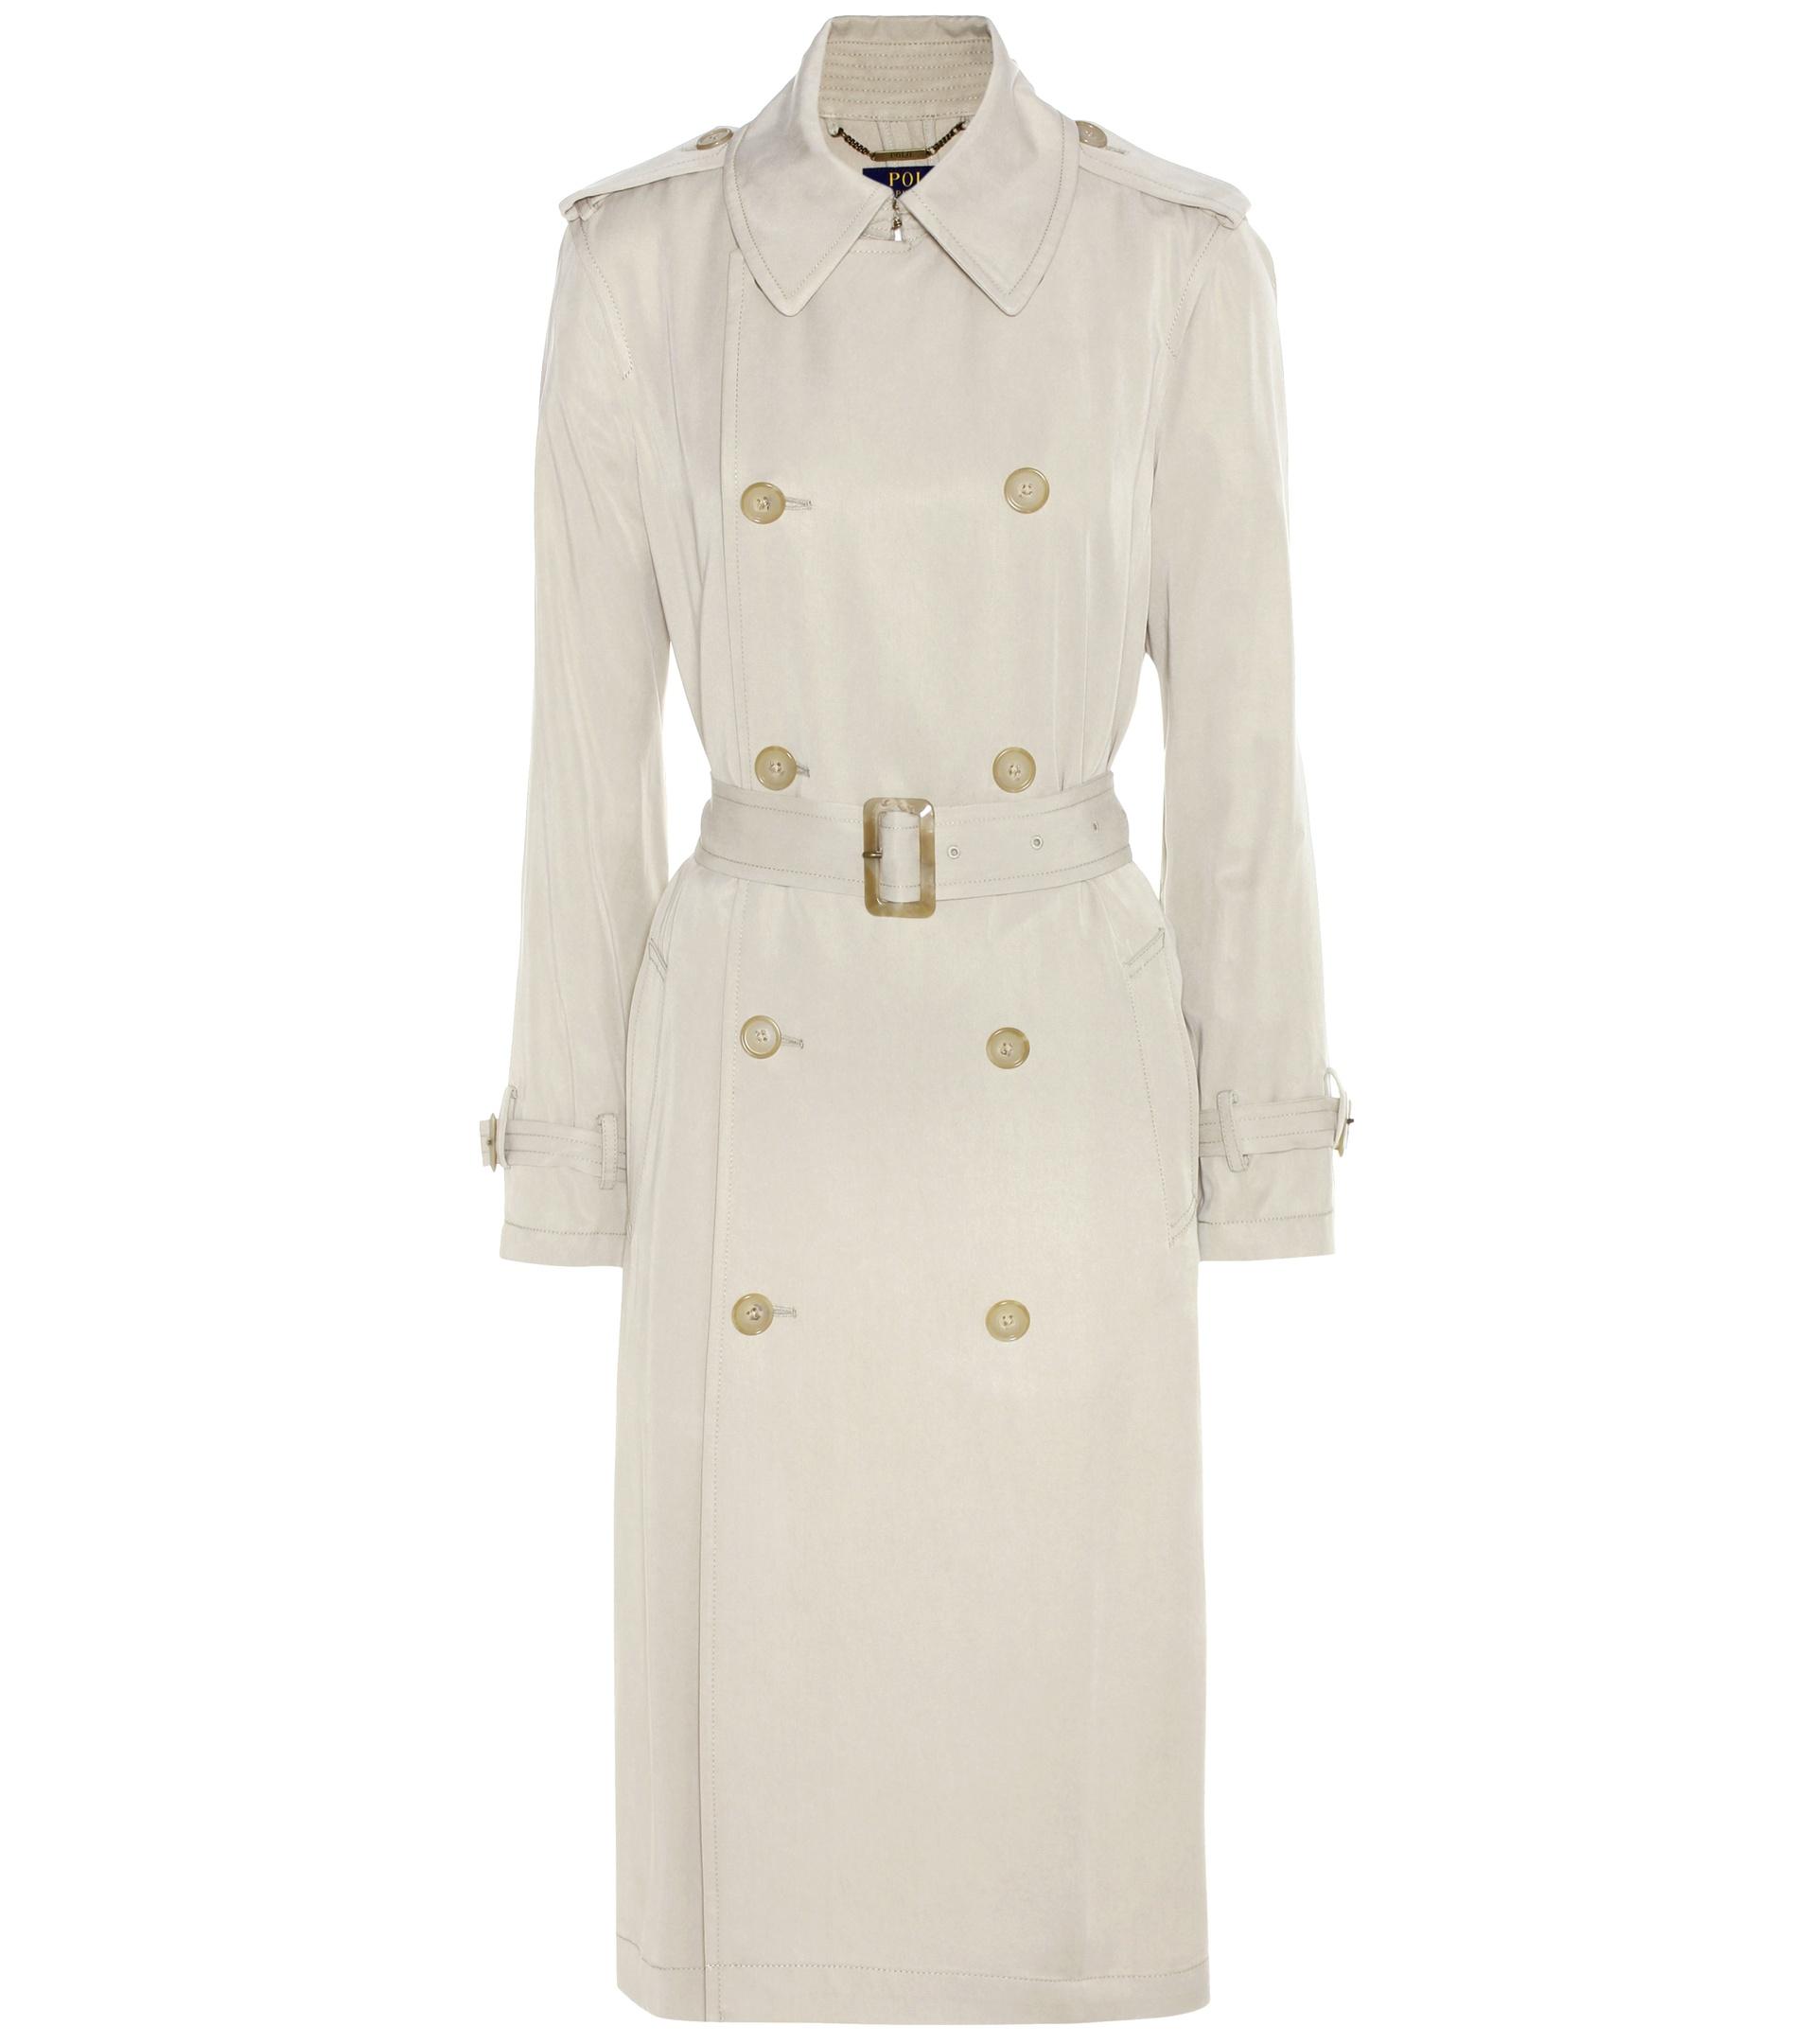 Lyst - Polo Ralph Lauren Twill Trench Coat in Natural